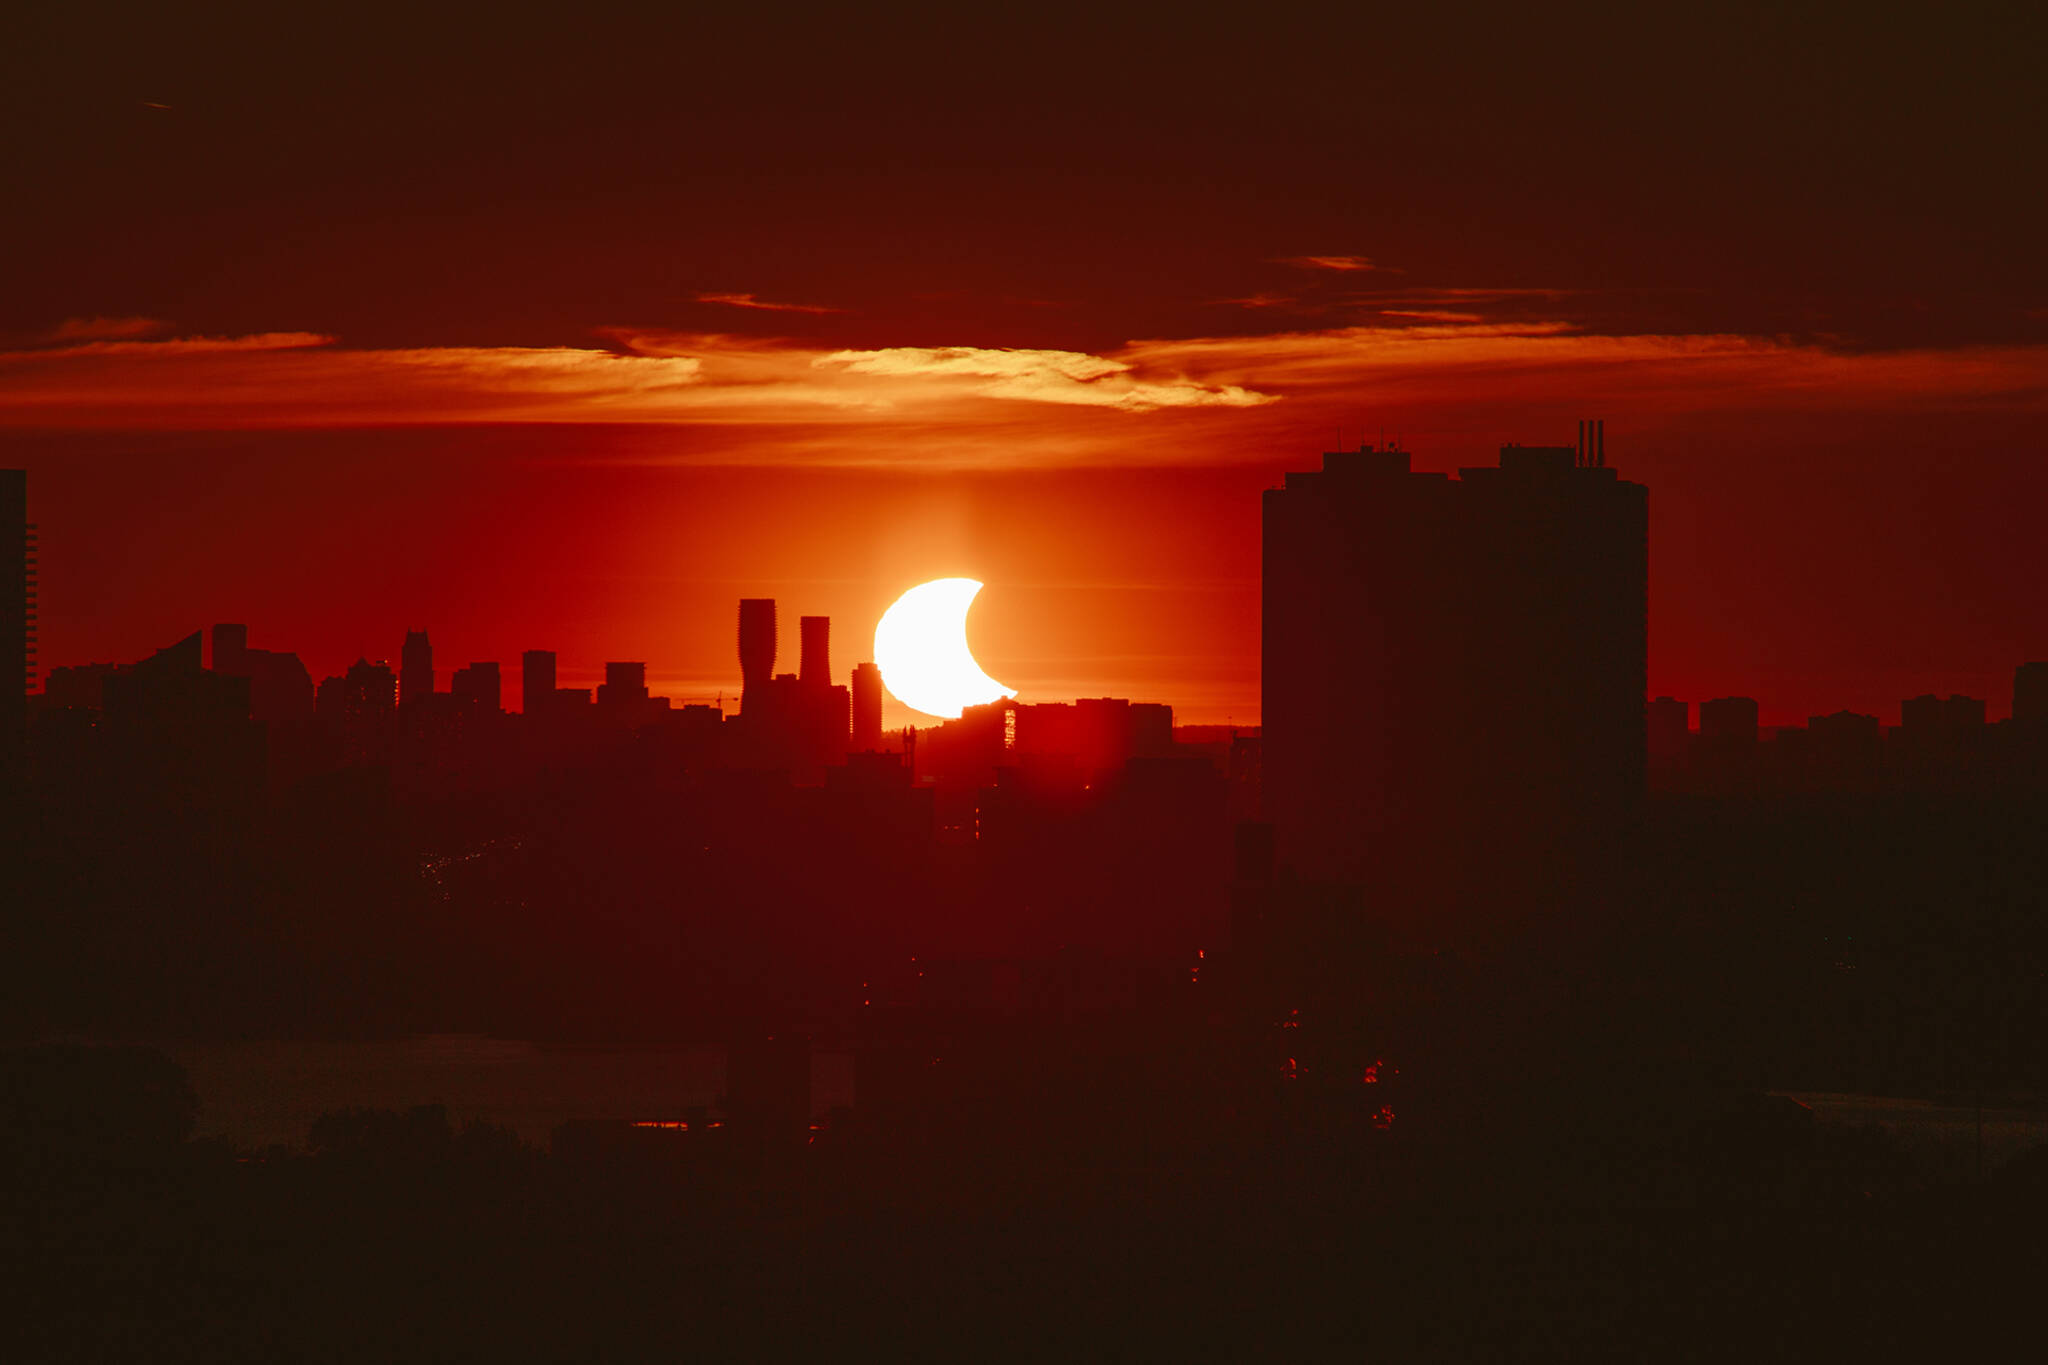 Solar eclipse will be the skywatching event of the year in Toronto